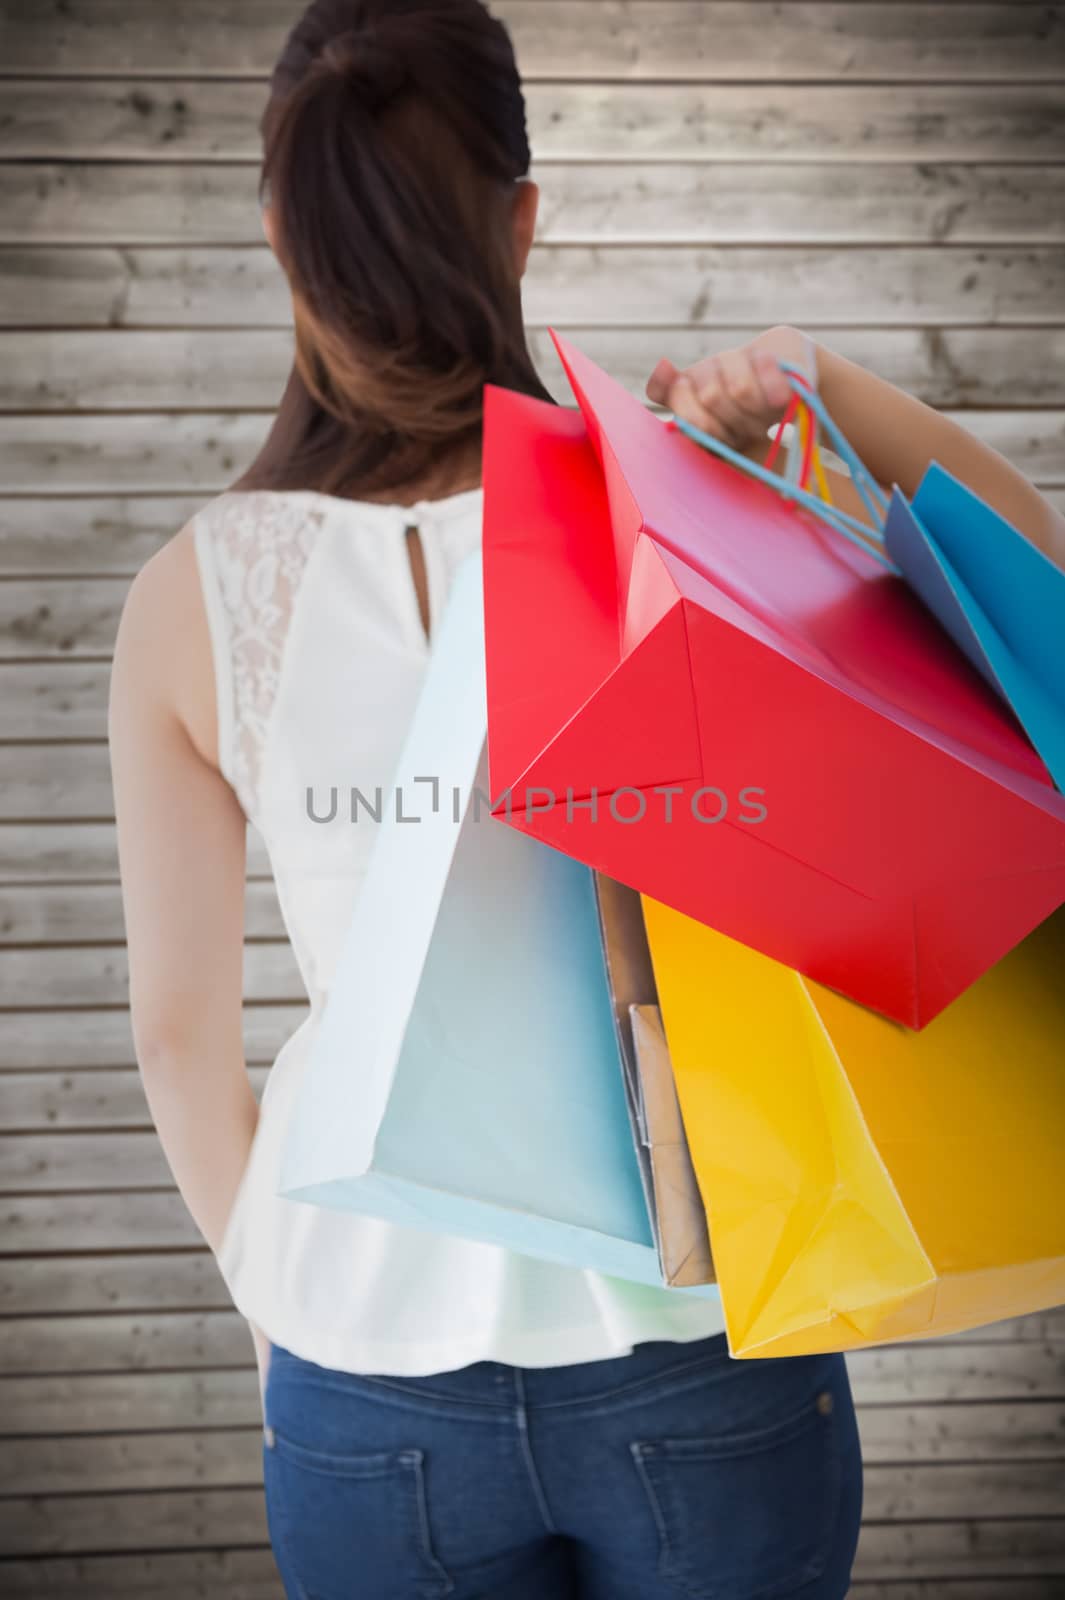 Rear view of brown hair holding shopping bags against wooden planks background